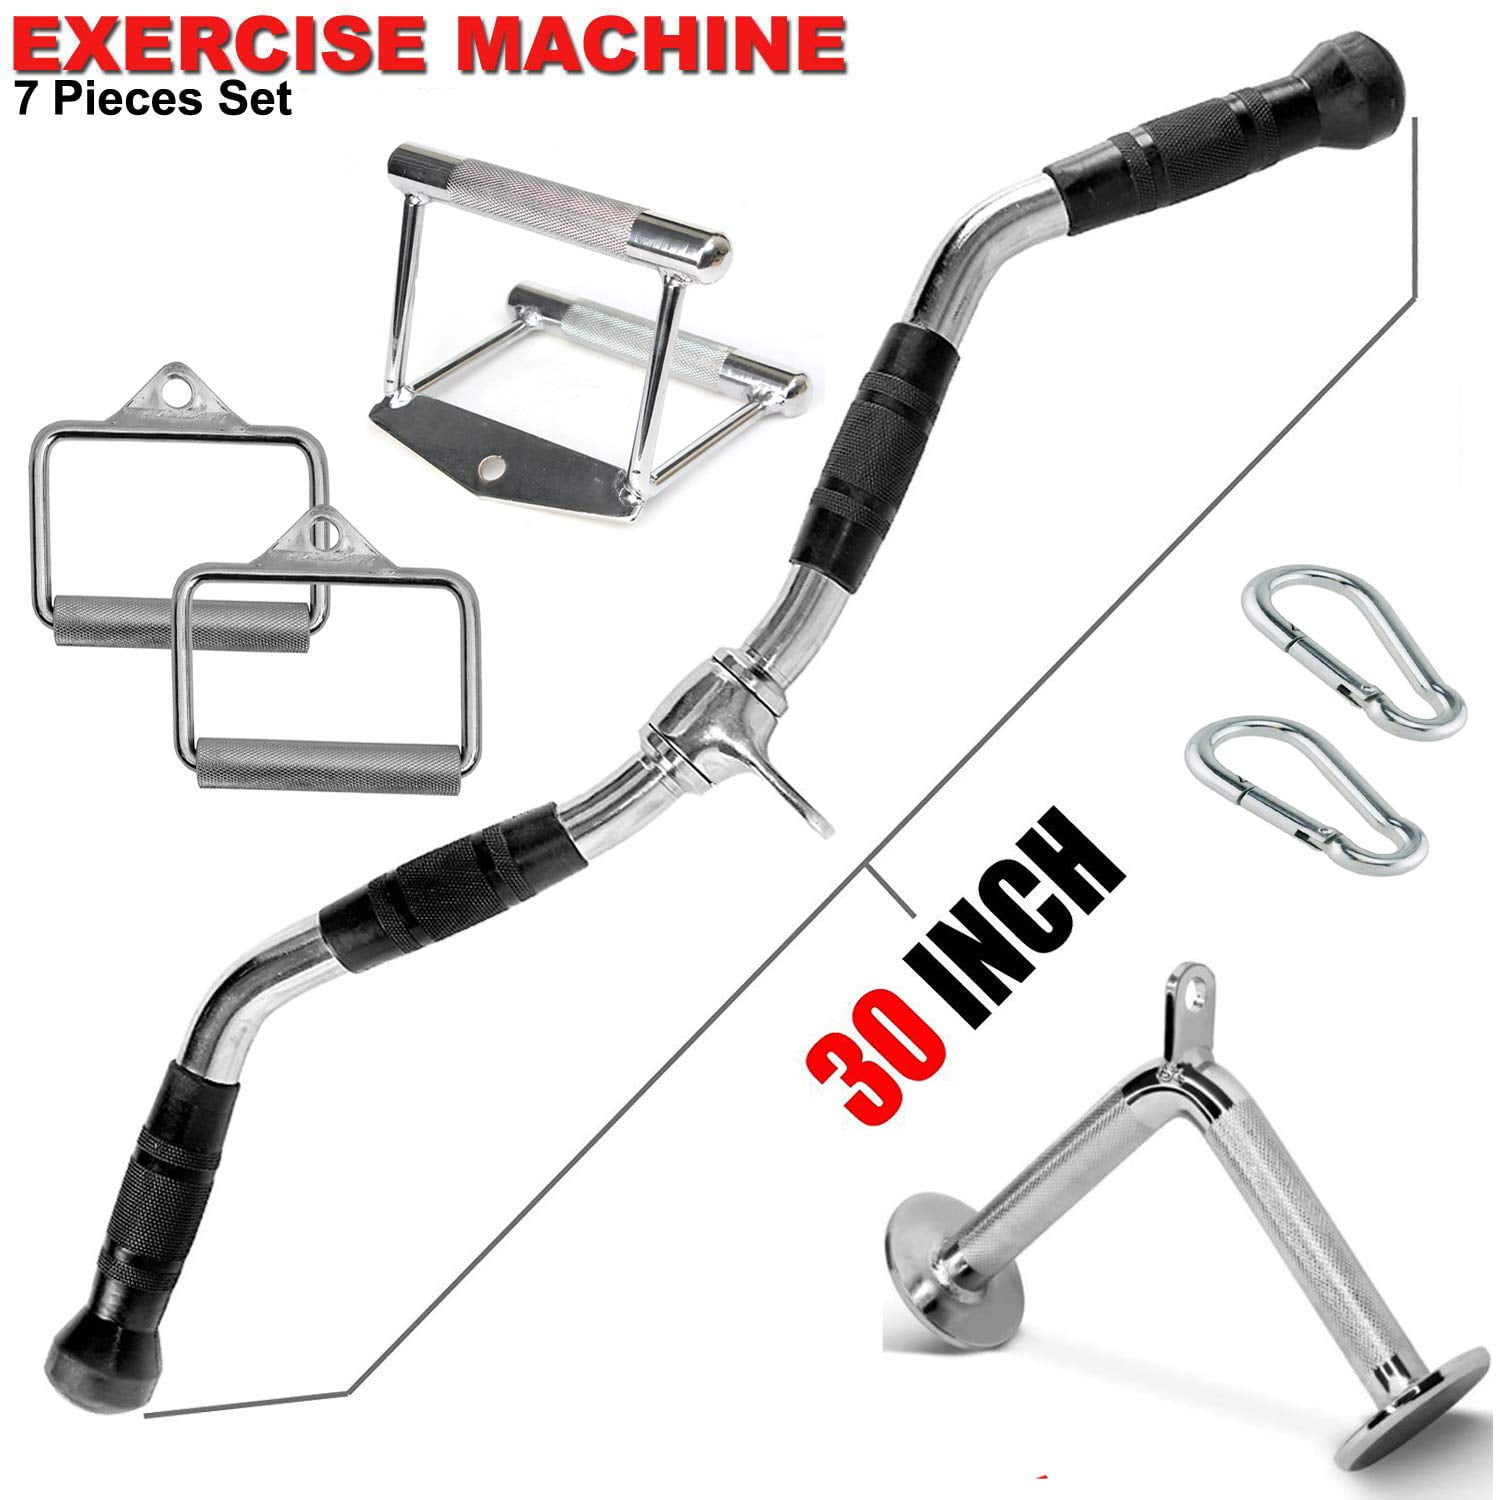 Row Handle for Cable Machines Home/Gym,Combo Tricep Press Down Cable Attachments,T-bar V-Bar Bicep Curl Tricep LAT pulldown Bar Back Strength Training Handle